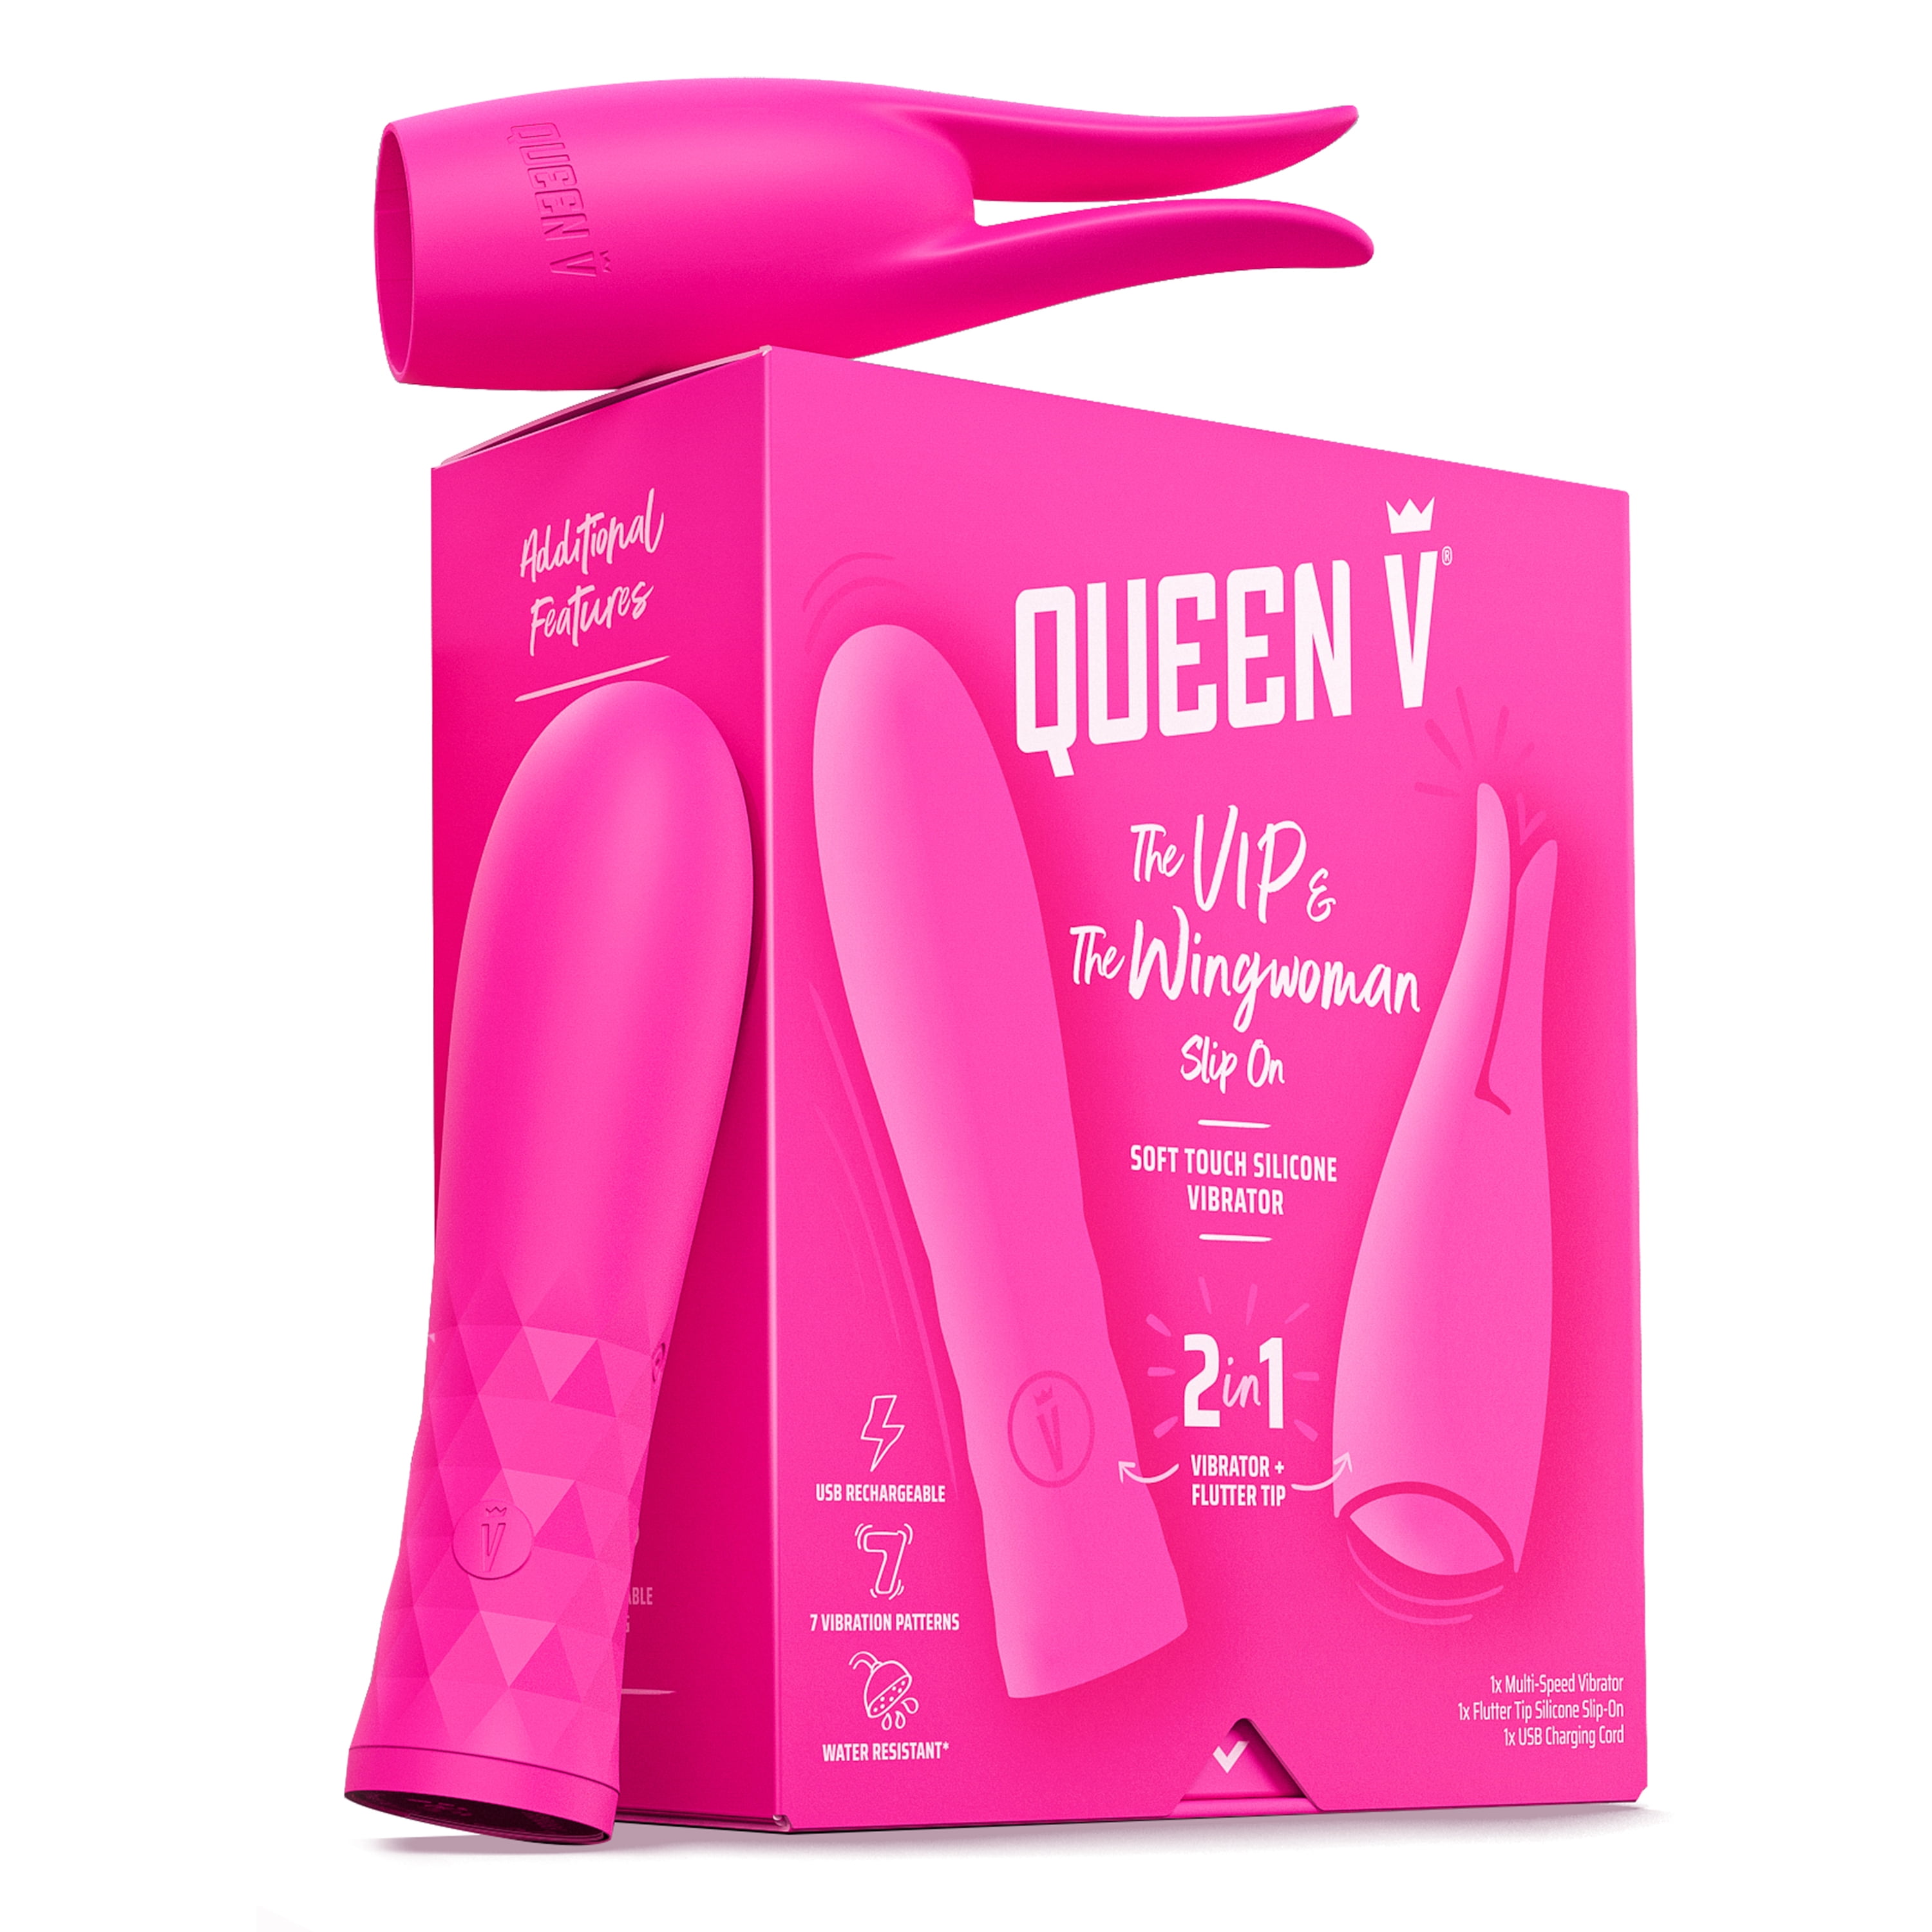 Queen V The VIP & The Wingwoman Slip On, Adult Sex Toy for Woman, 2 in 1: Multi-Speed Vibrator + Flutter Tip Slip On, USB Rechargeable, Water Resistant, Soft Touch Silicone Personal Massager